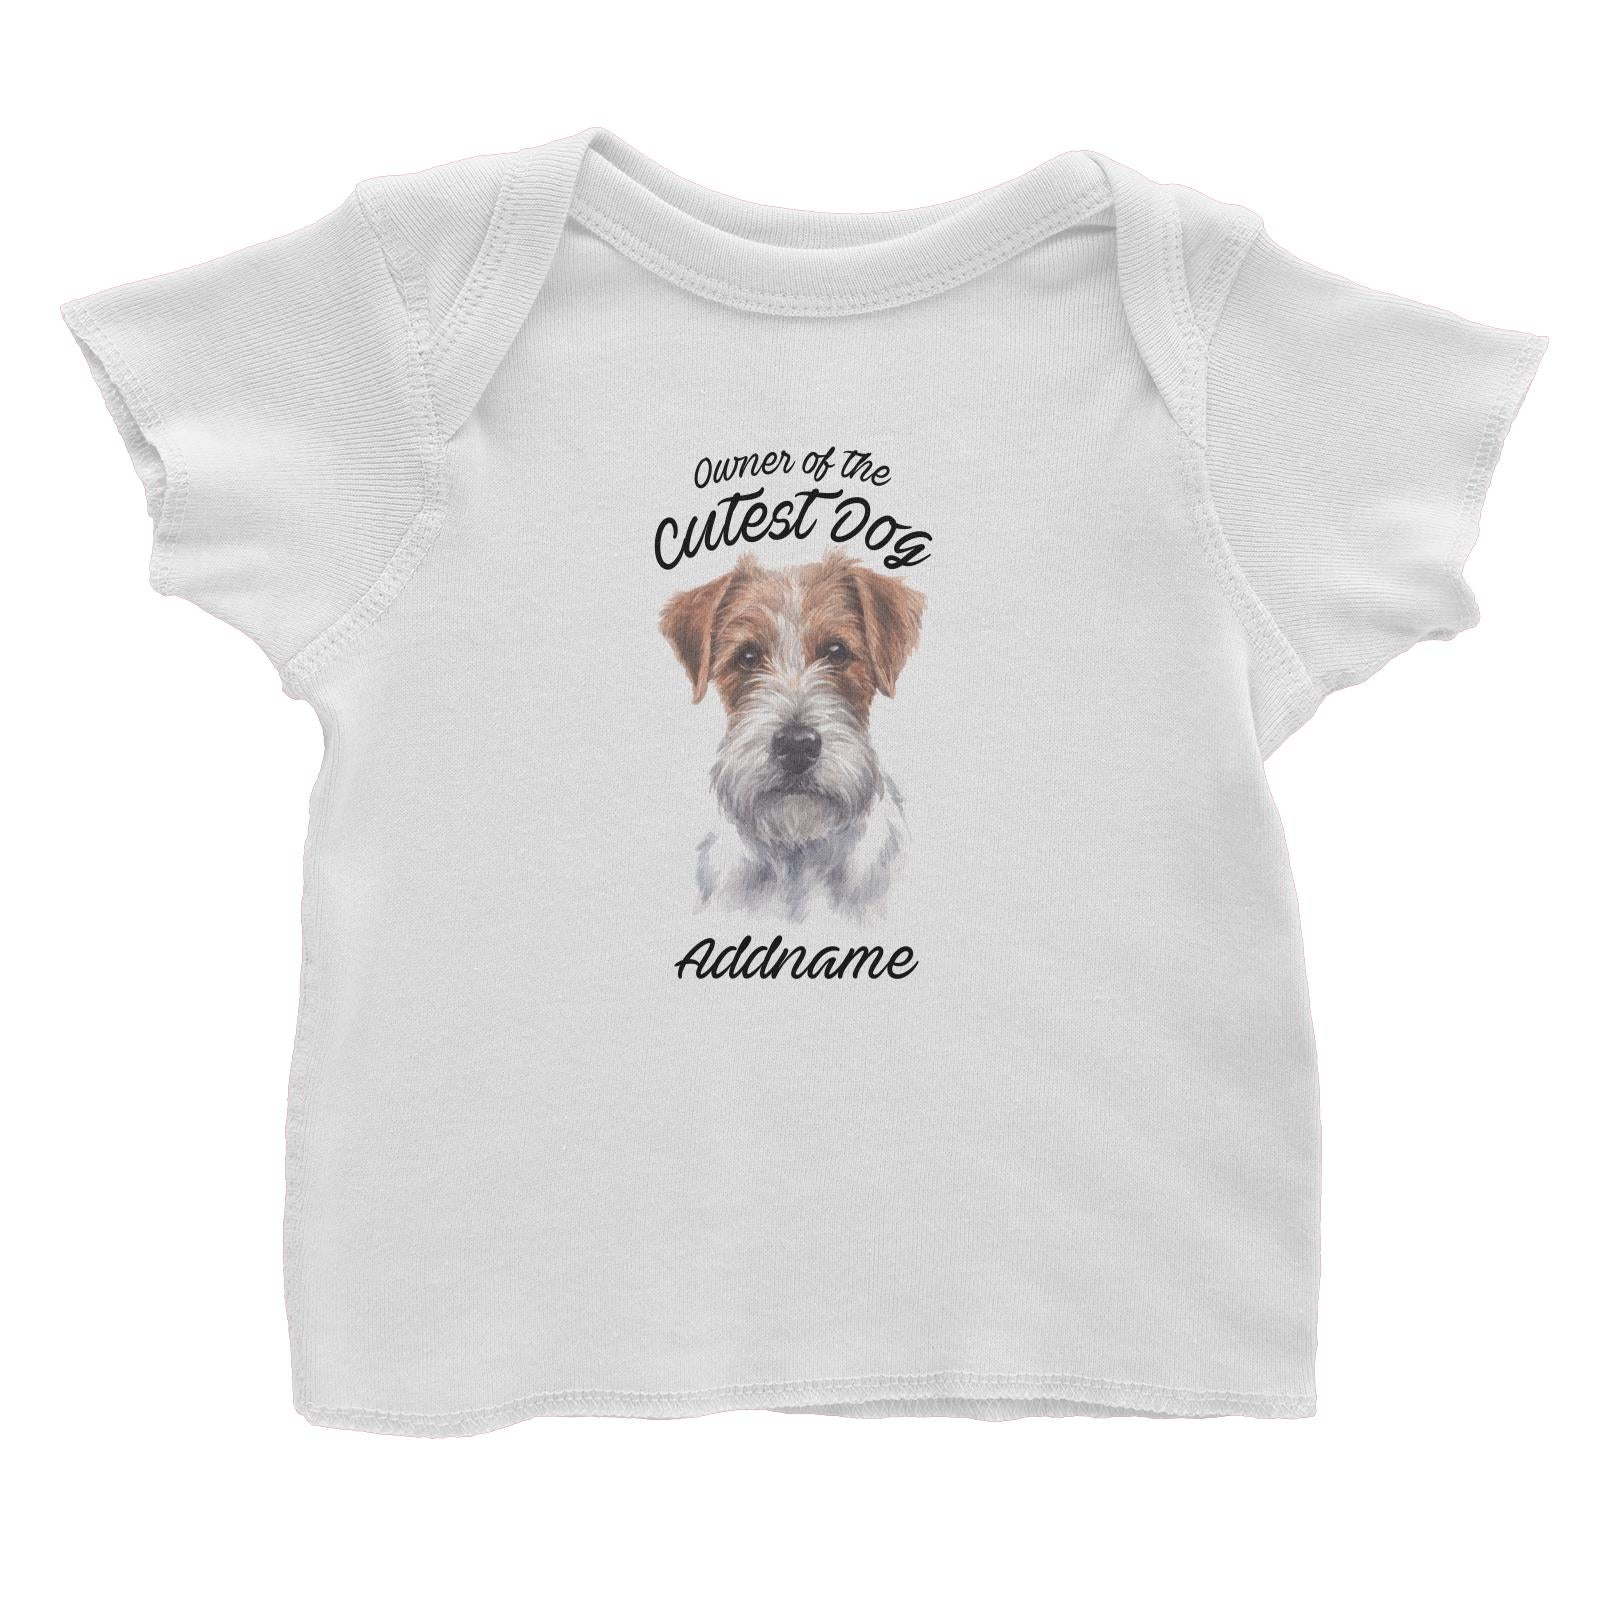 Watercolor Dog Owner Of The Cutest Dog Jack Russell Long Hair Addname Baby T-Shirt